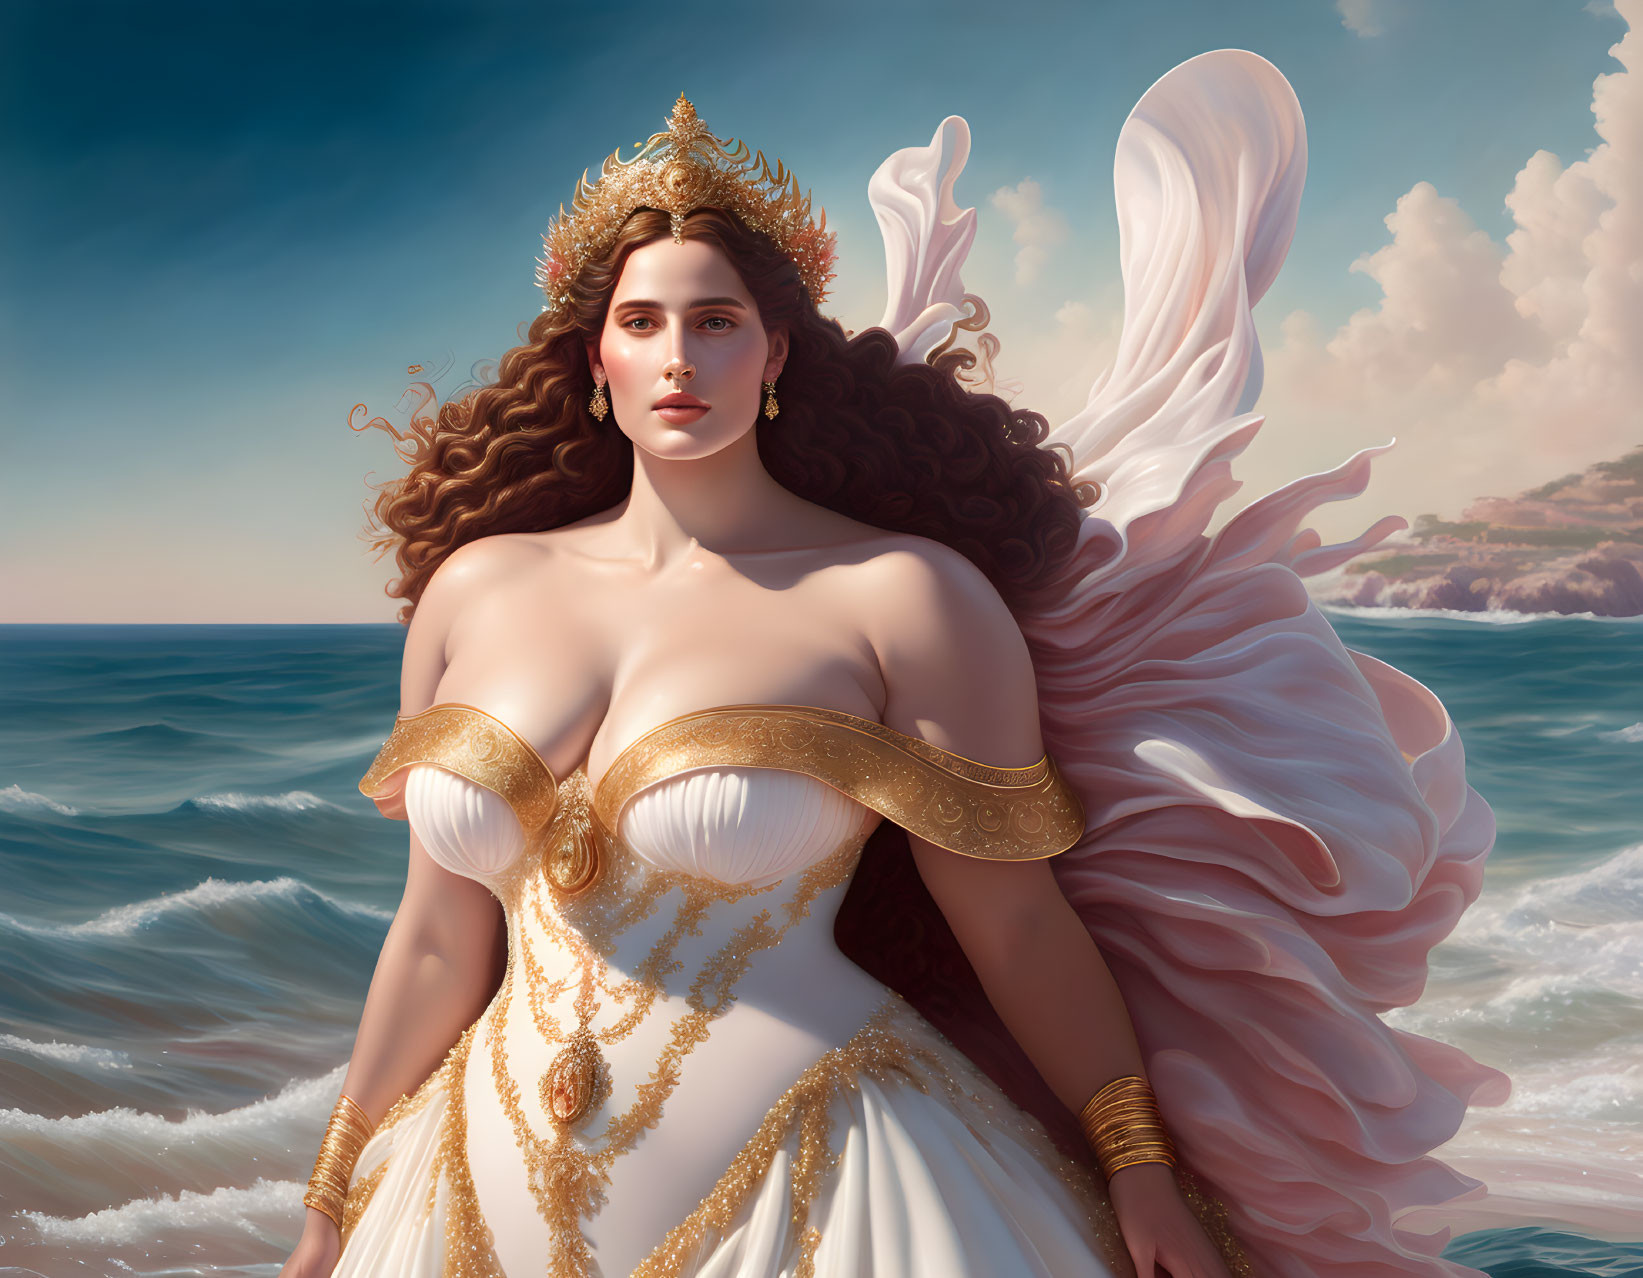 Aphrodite rises from the sea